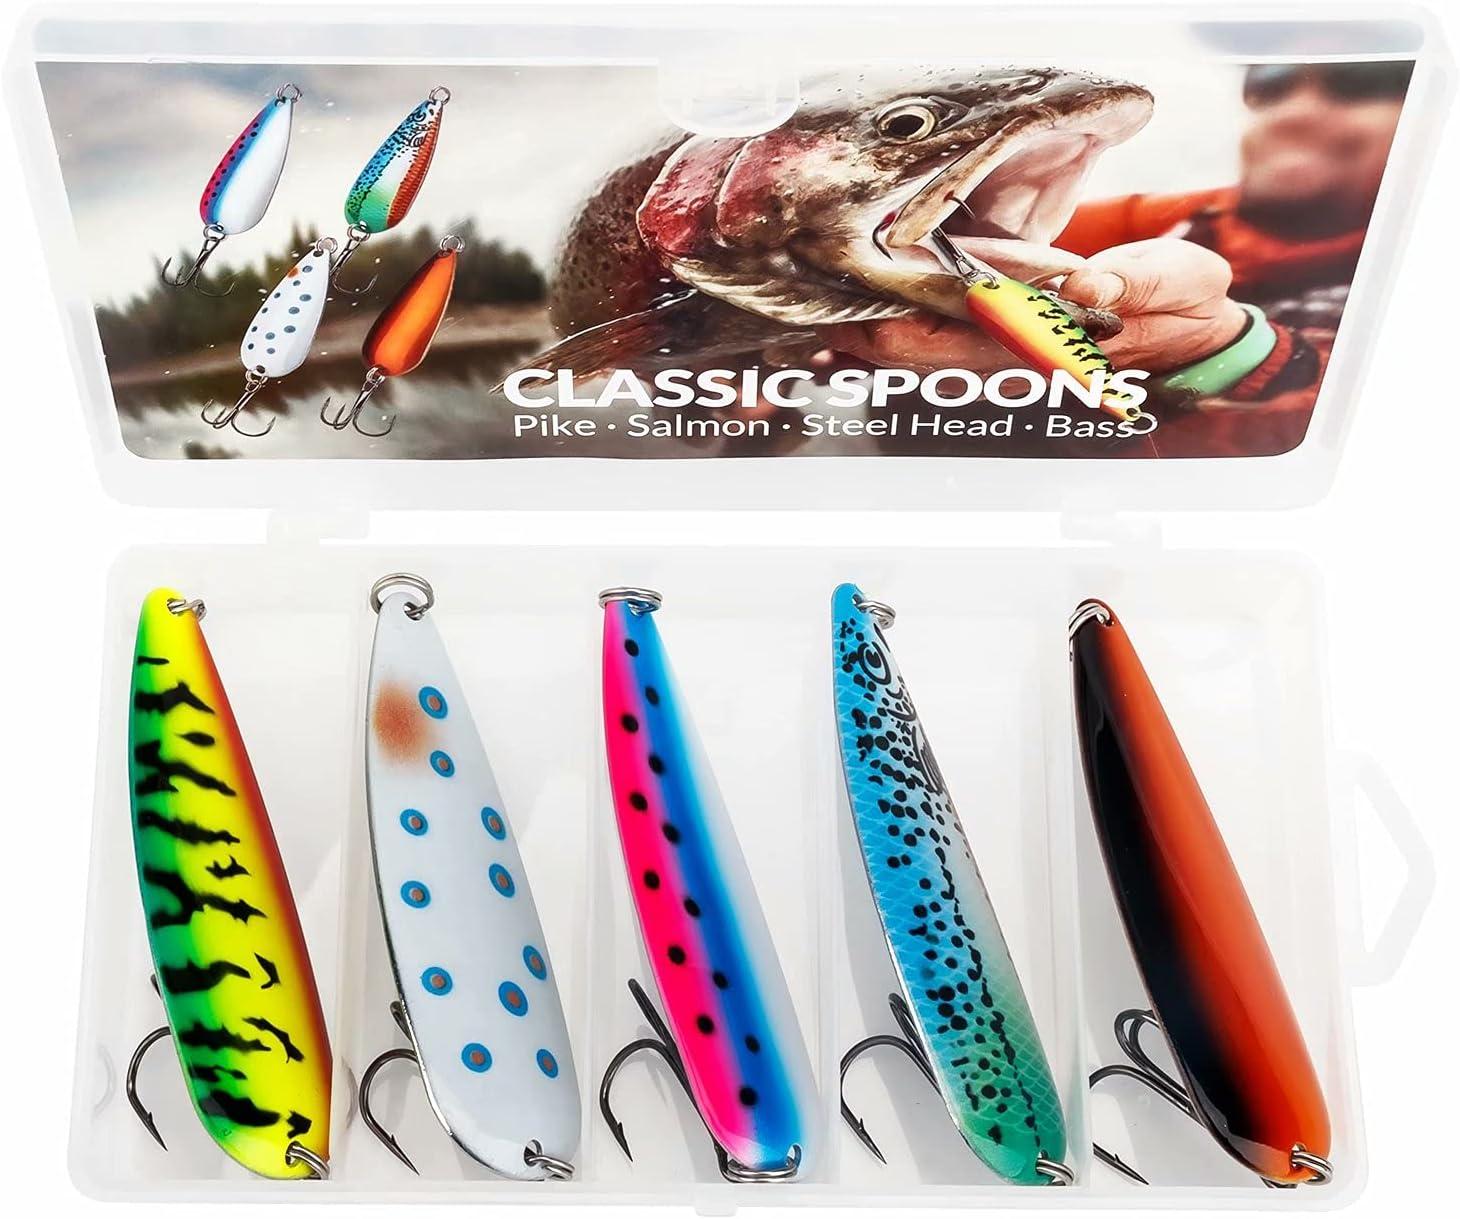 THKFISH Fishing Lures Fishing Spoons Fishing Bait Trout Lures Bass